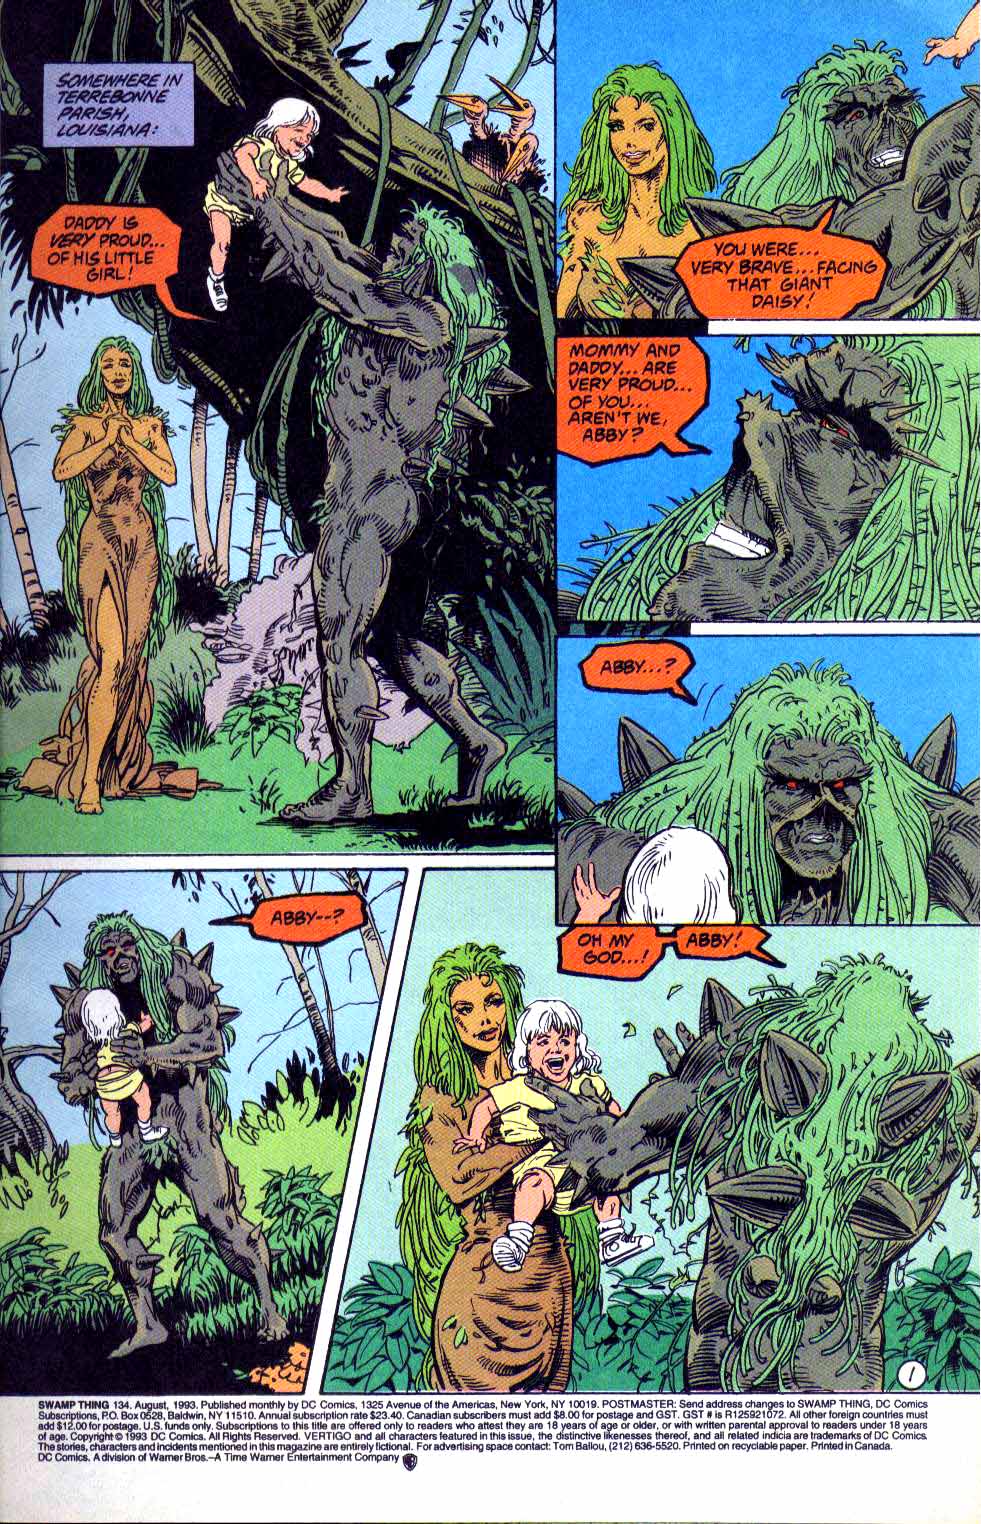 Swamp Thing Toon Xxx - Swamp Thing V2 134 | Read Swamp Thing V2 134 comic online in high quality.  Read Full Comic online for free - Read comics online in high quality  .|viewcomiconline.com